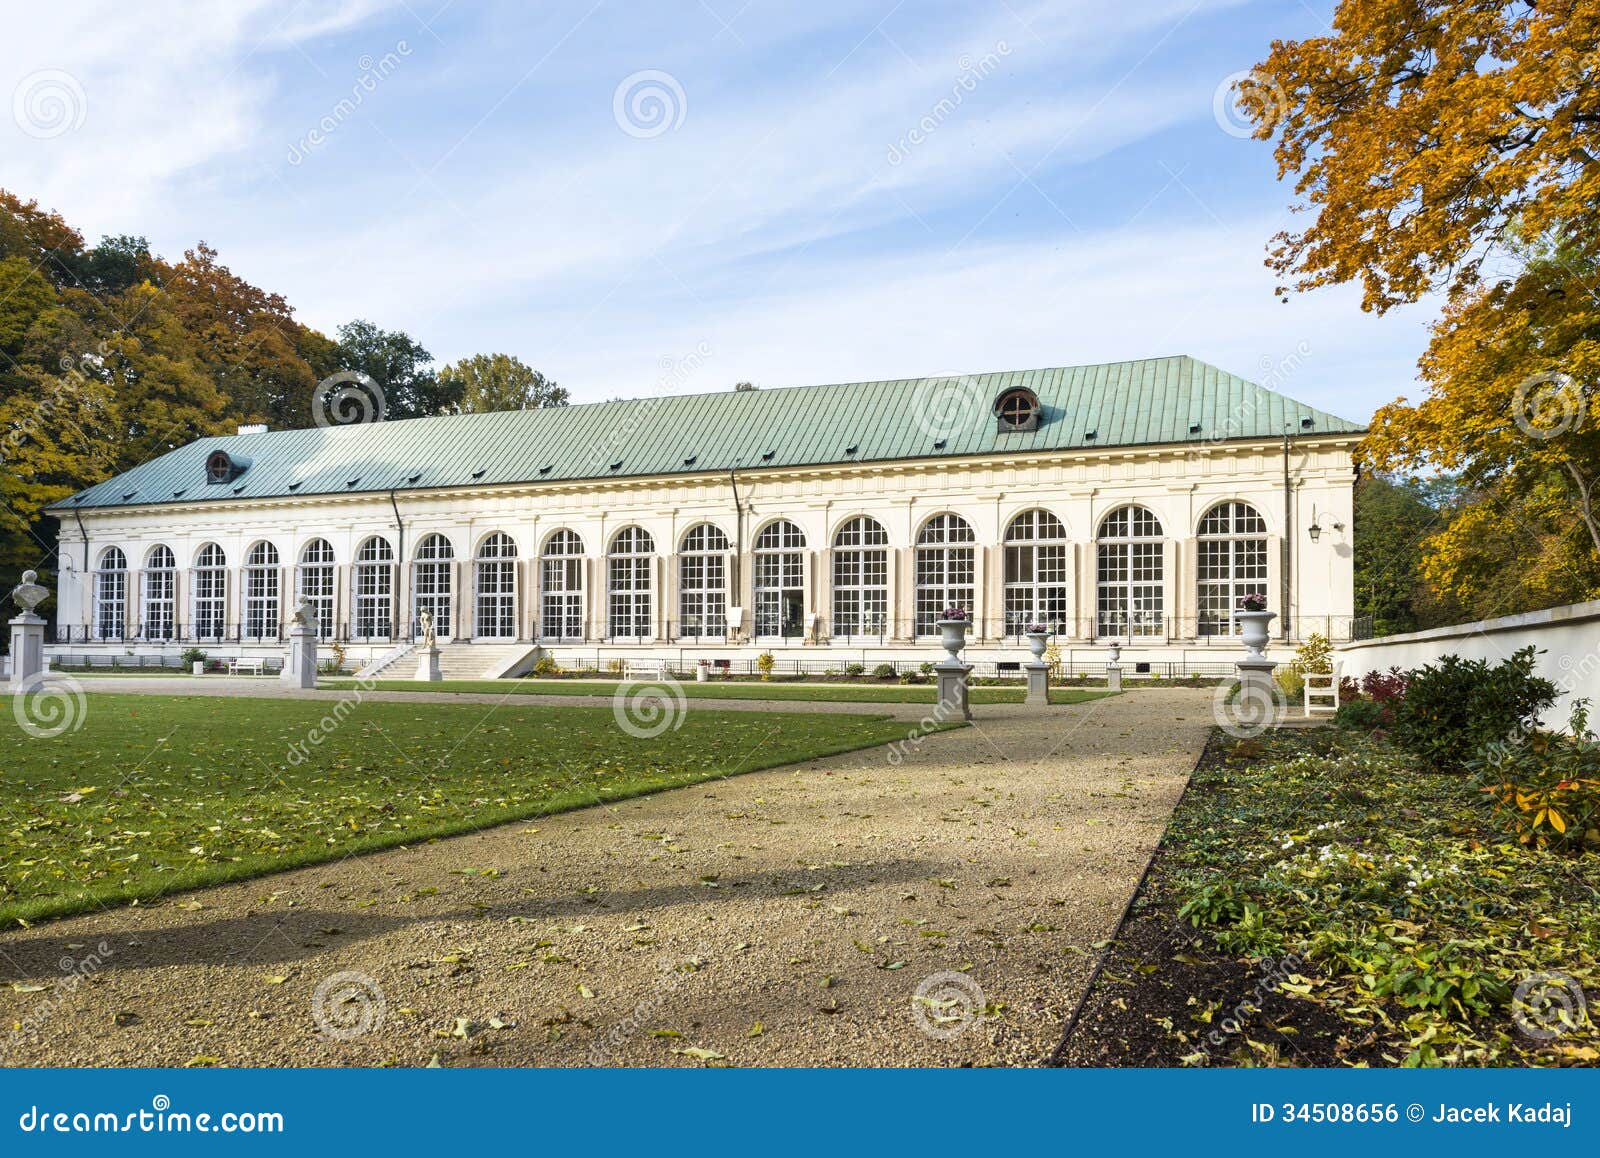 panoramic view of old orangery in lazienki park, warsaw, poland